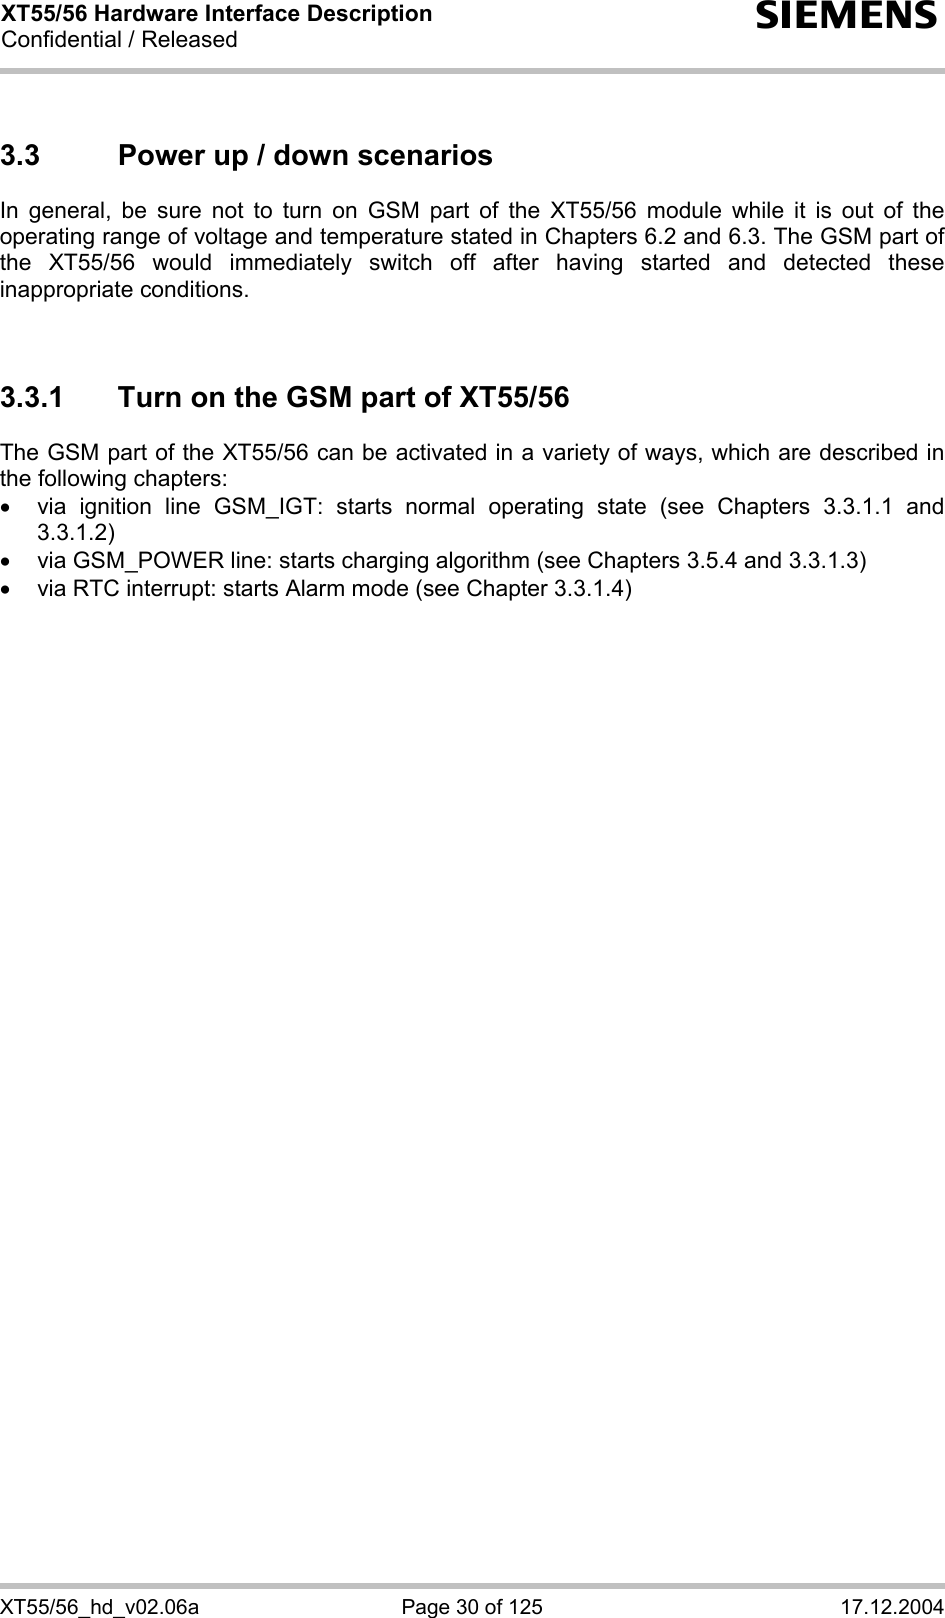 XT55/56 Hardware Interface Description Confidential / Released s XT55/56_hd_v02.06a  Page 30 of 125  17.12.2004 3.3  Power up / down scenarios In general, be sure not to turn on GSM part of the XT55/56 module while it is out of the operating range of voltage and temperature stated in Chapters 6.2 and 6.3. The GSM part of the XT55/56 would immediately switch off after having started and detected these inappropriate conditions.   3.3.1  Turn on the GSM part of XT55/56 The GSM part of the XT55/56 can be activated in a variety of ways, which are described in the following chapters: •  via ignition line GSM_IGT: starts normal operating state (see Chapters 3.3.1.1 and 3.3.1.2) •  via GSM_POWER line: starts charging algorithm (see Chapters 3.5.4 and 3.3.1.3) •  via RTC interrupt: starts Alarm mode (see Chapter 3.3.1.4)  